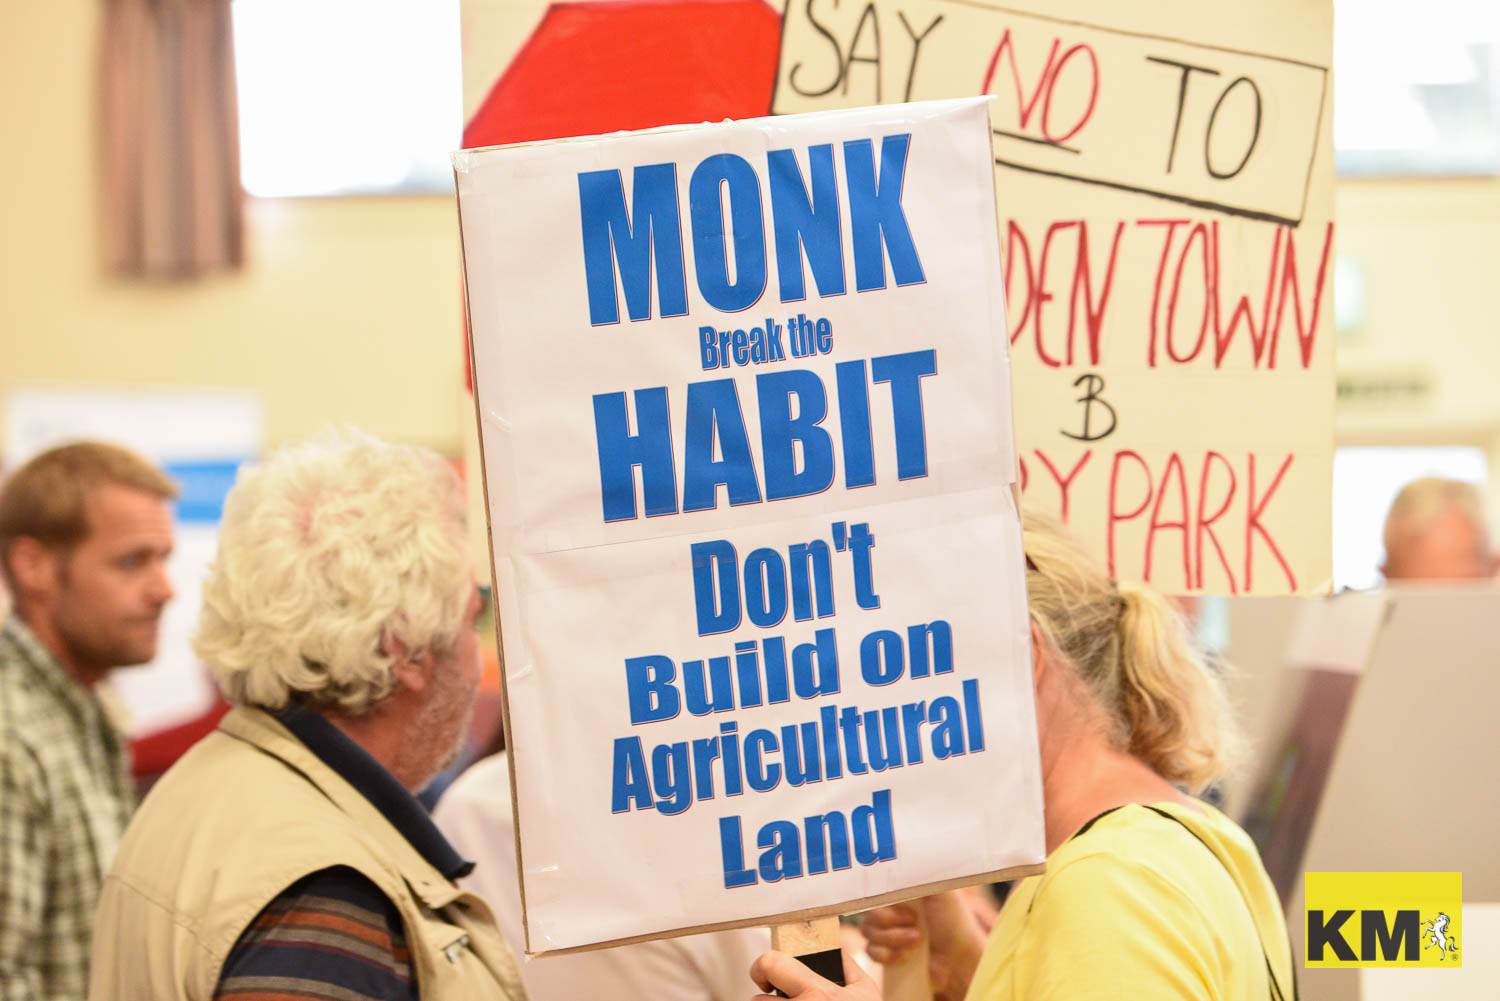 A press image from a protest about a planned lorry park